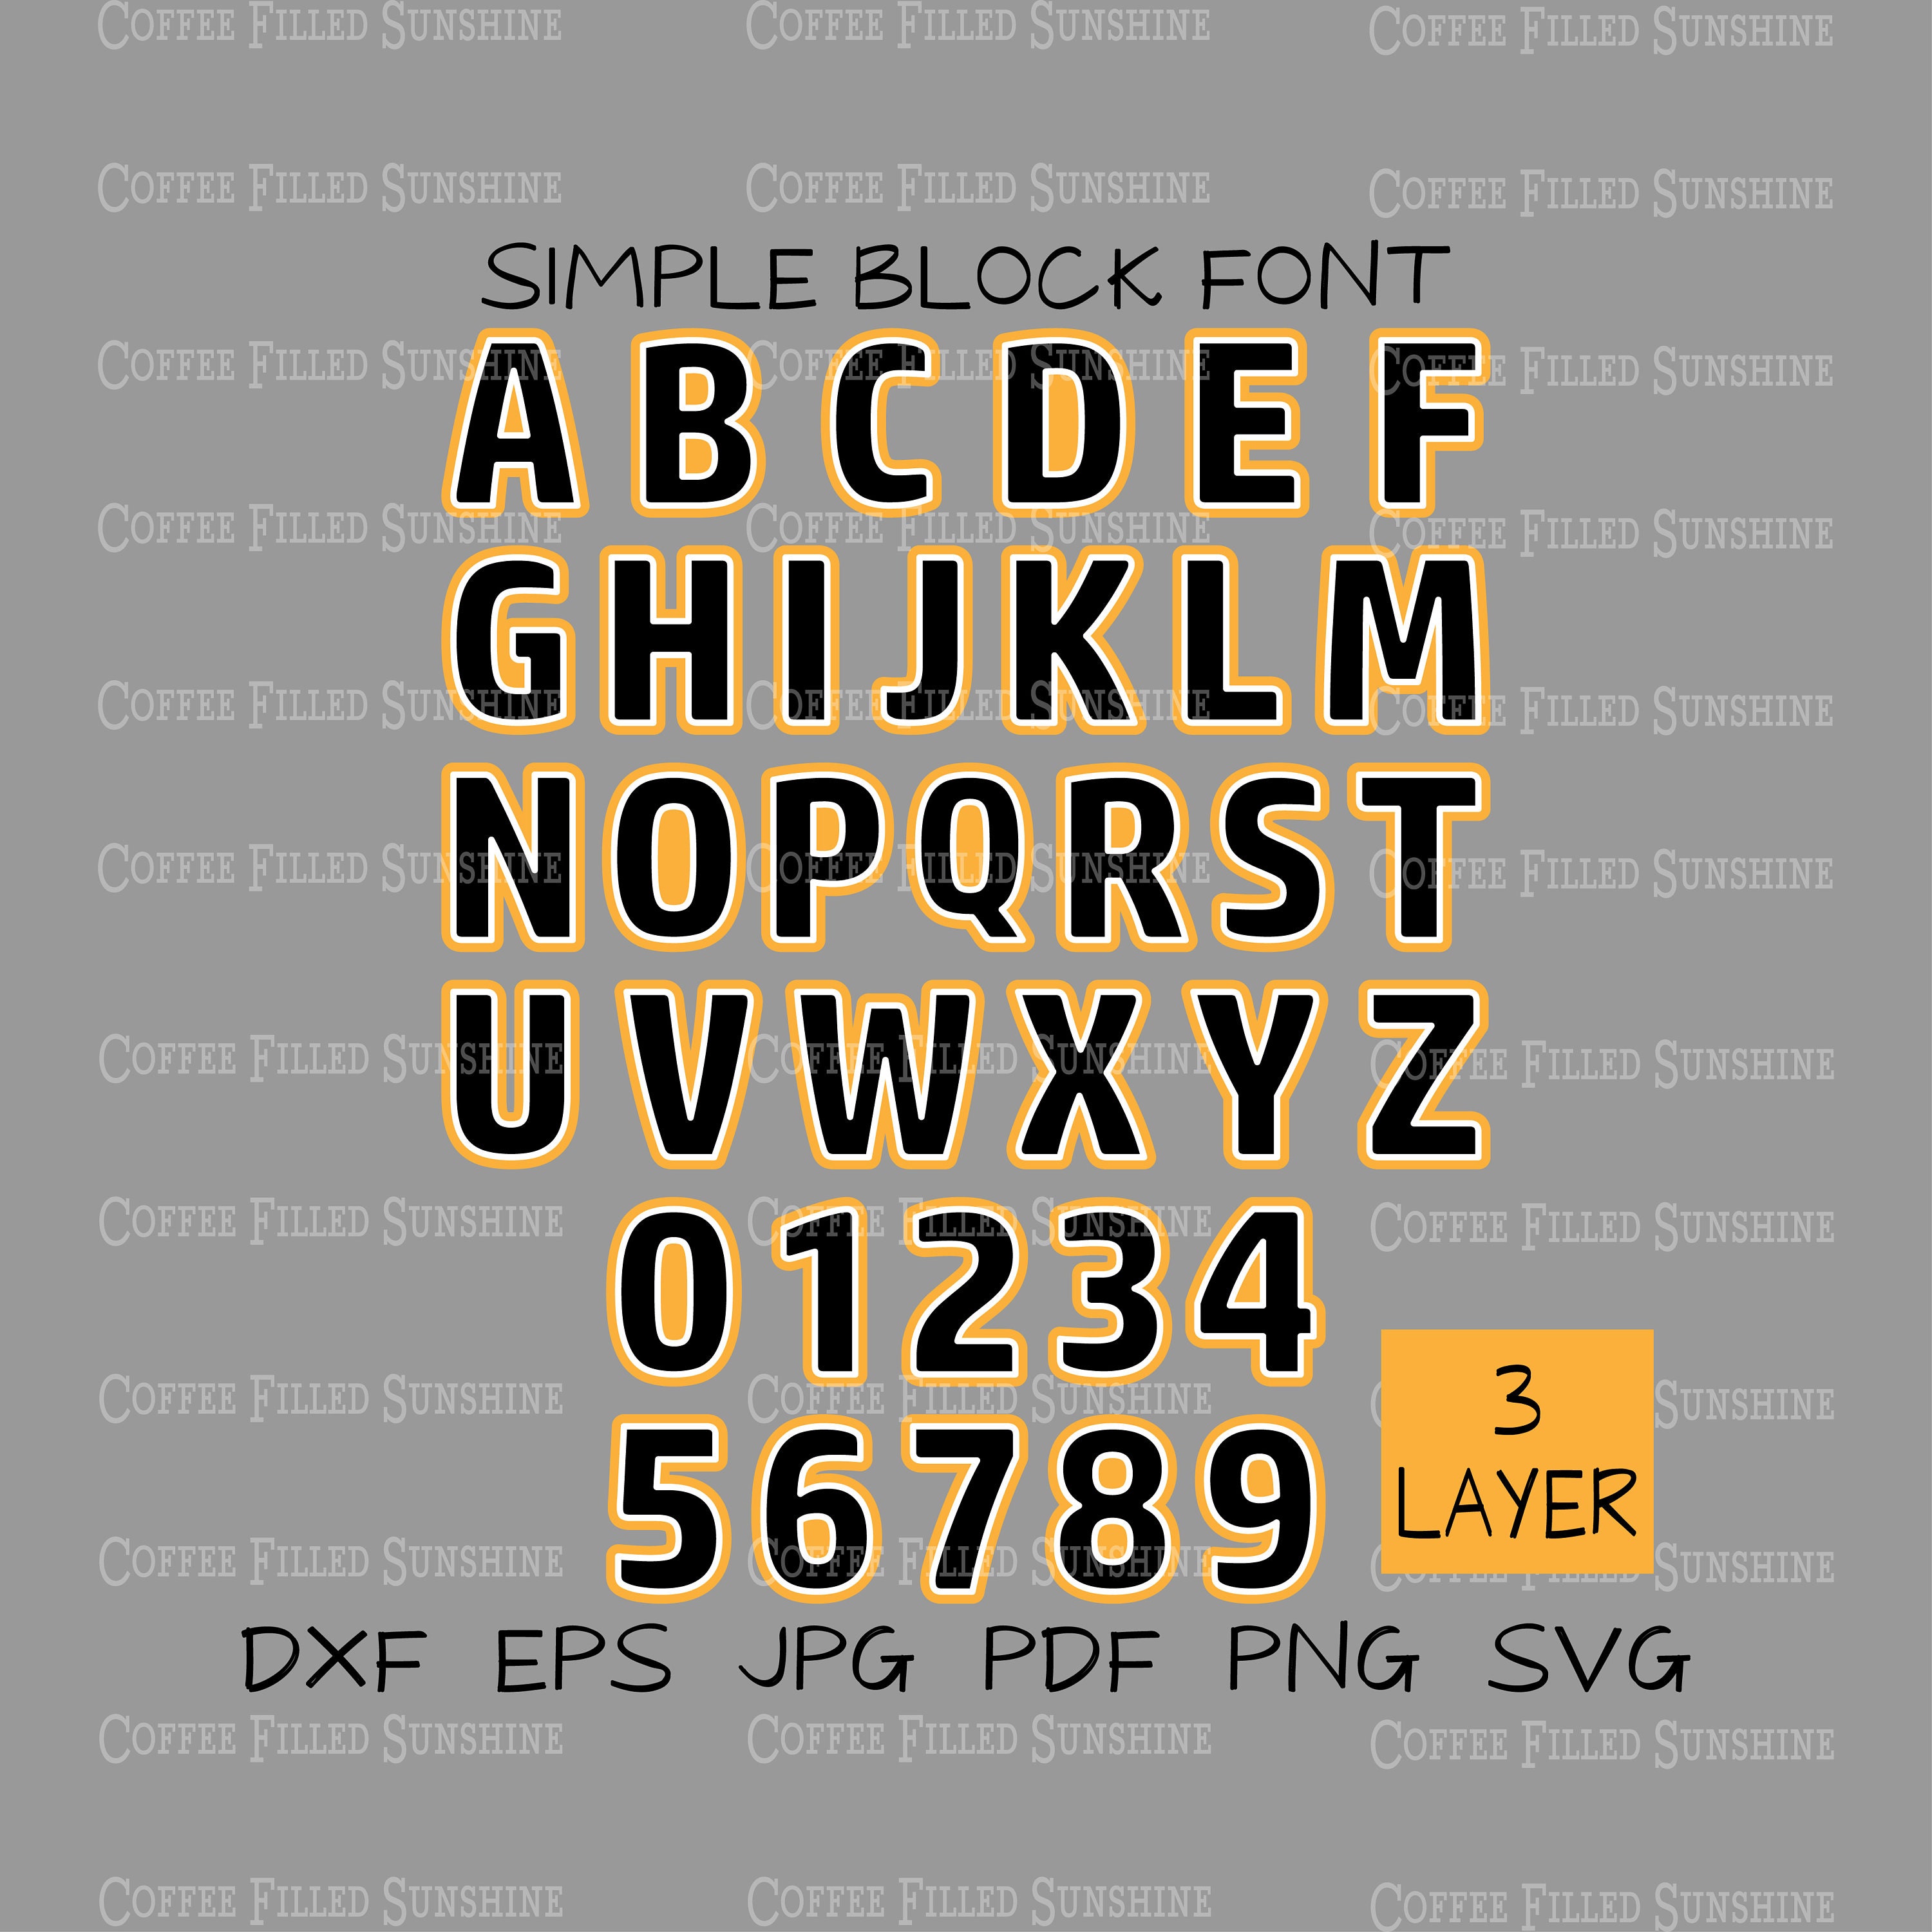 1 1/2 Inch Double Layer Letters or Numbers